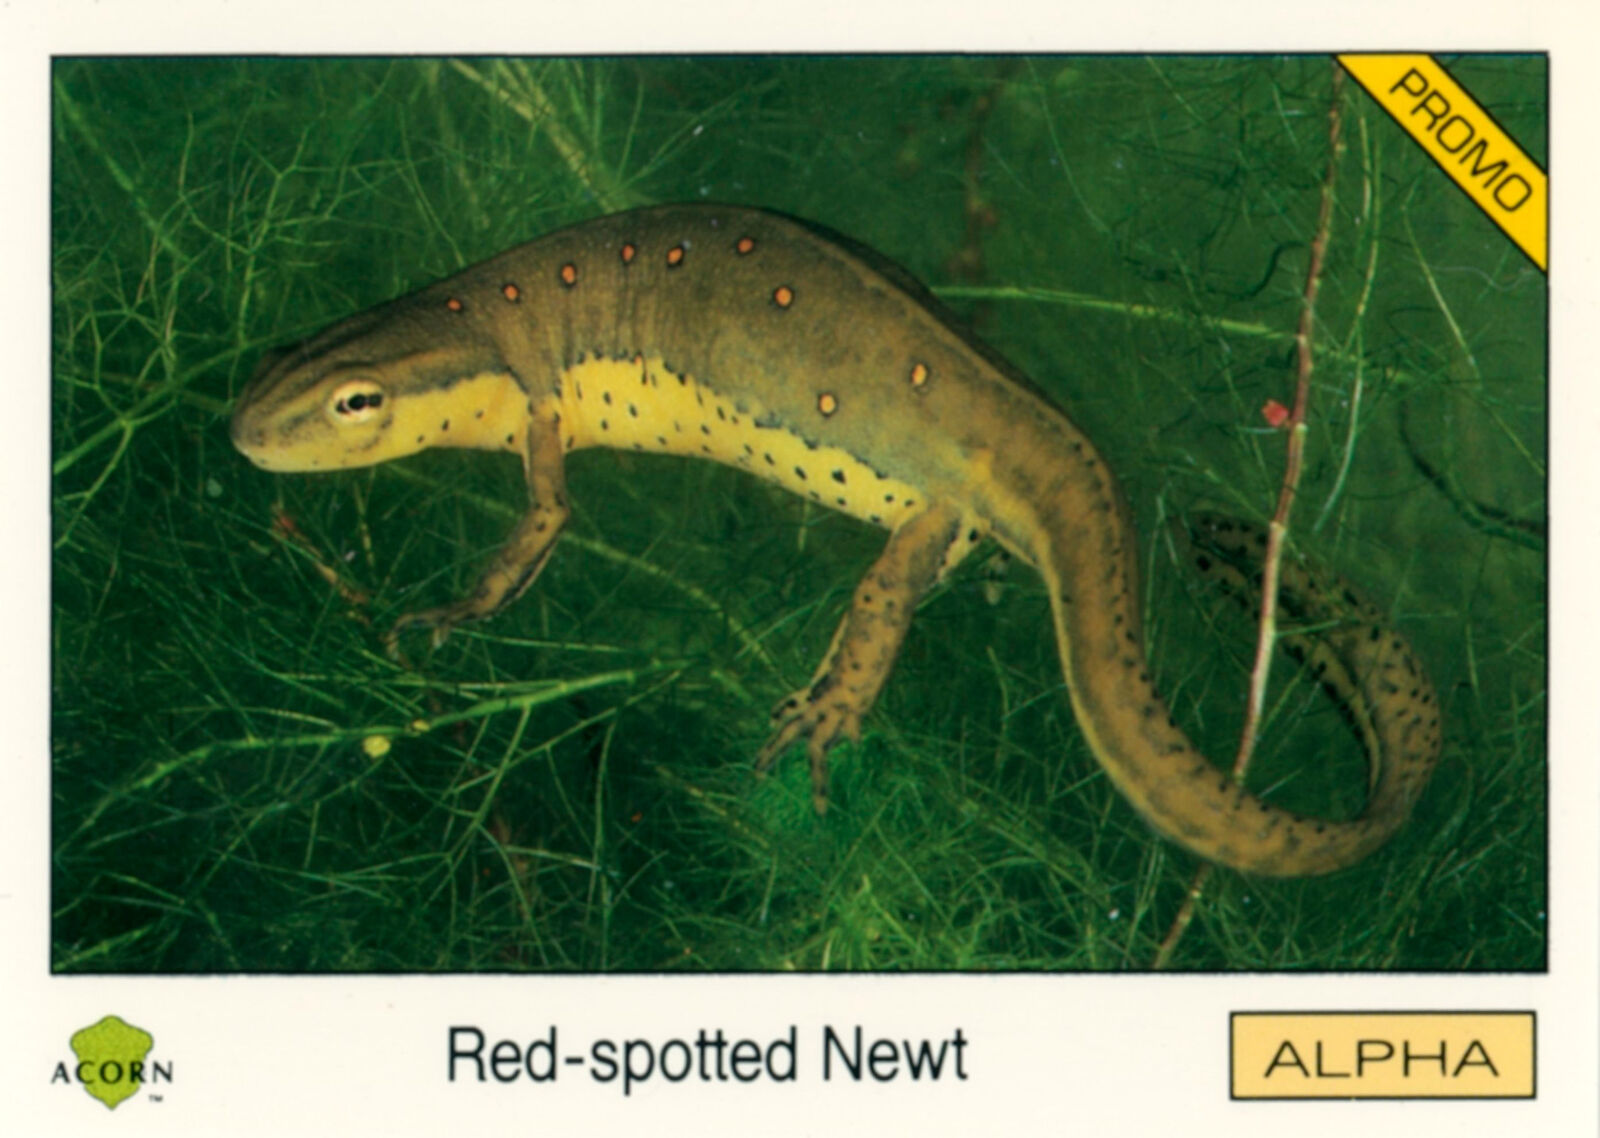 Rare 1991 Acorn Biosphere Promo Card 85 Red-spotted Newt